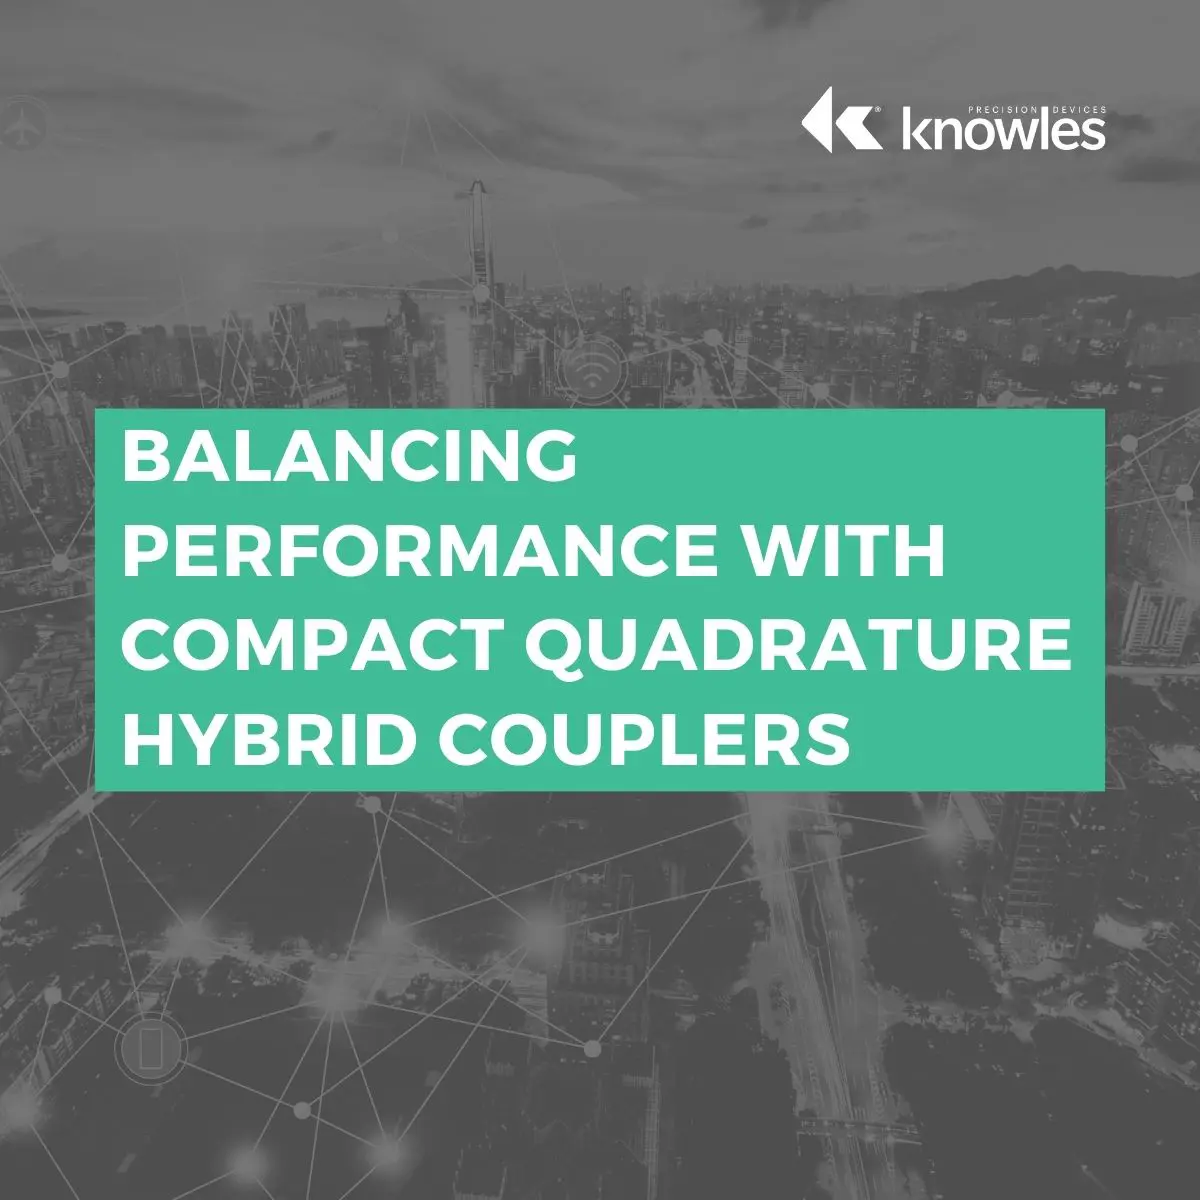 Balancing Performance with Compact Quadrature Hybrid Couplers